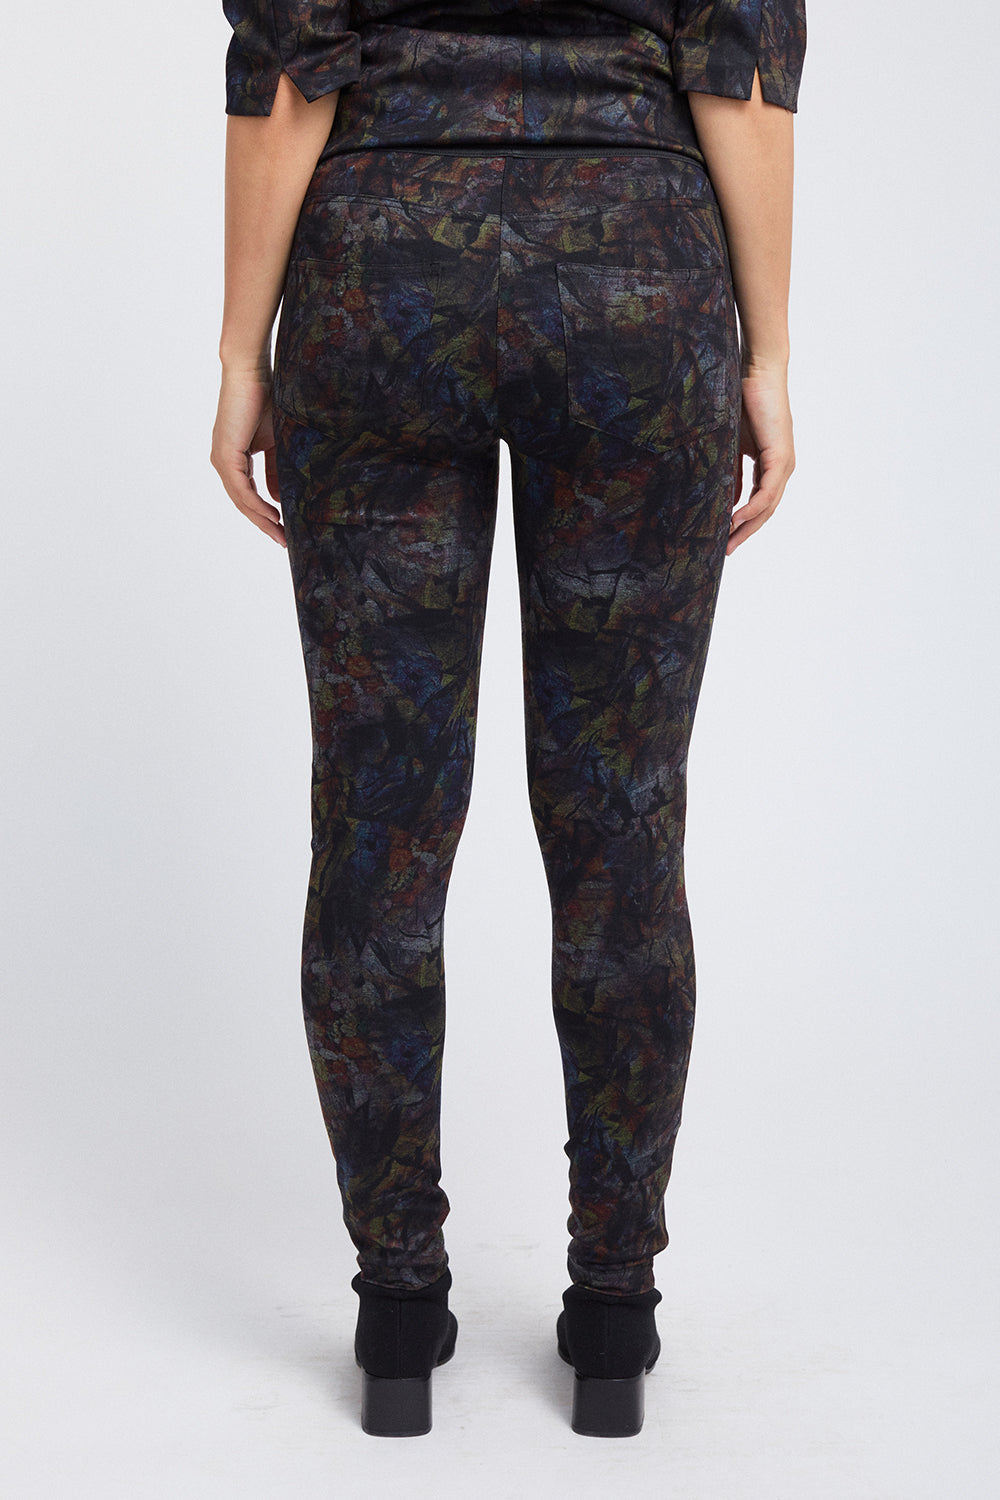 Jade Jegging - Stained Glass: FINAL SALE